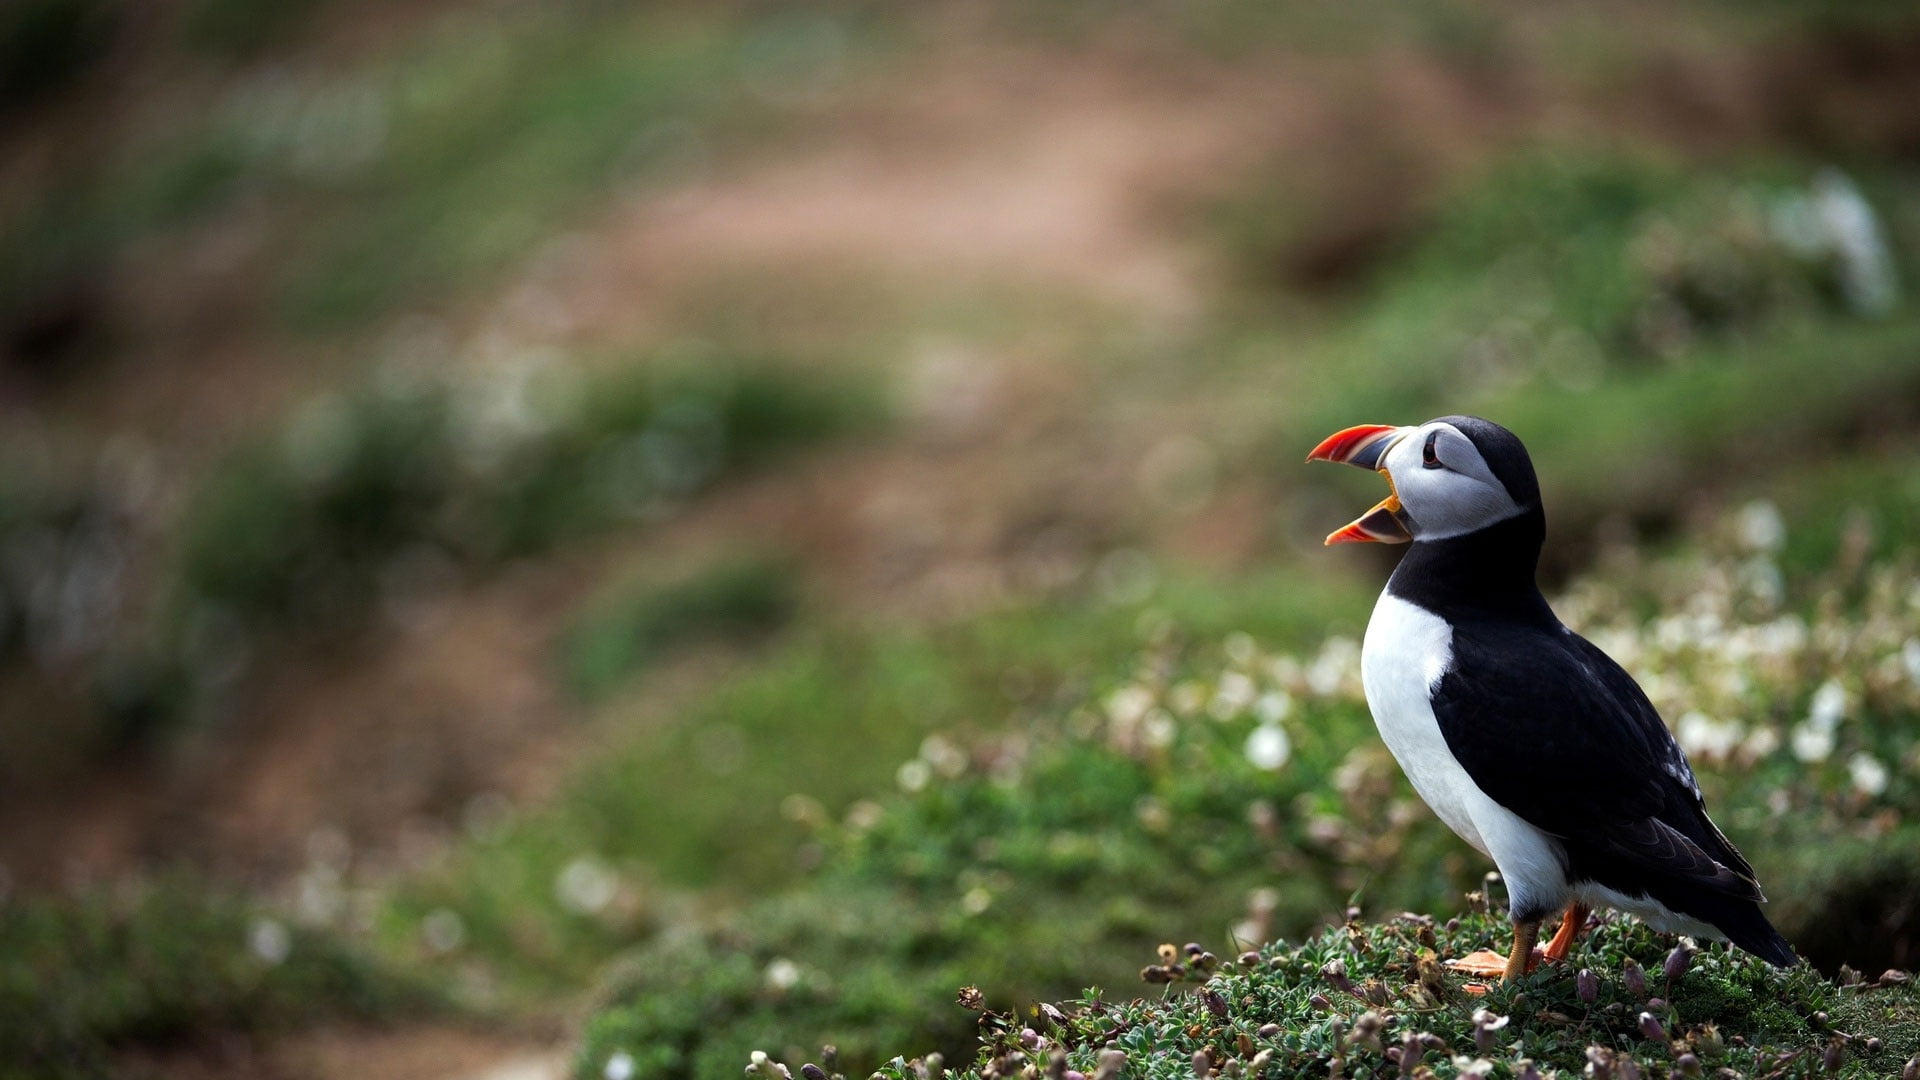 Puffin standing near green grass taking picture during daytime